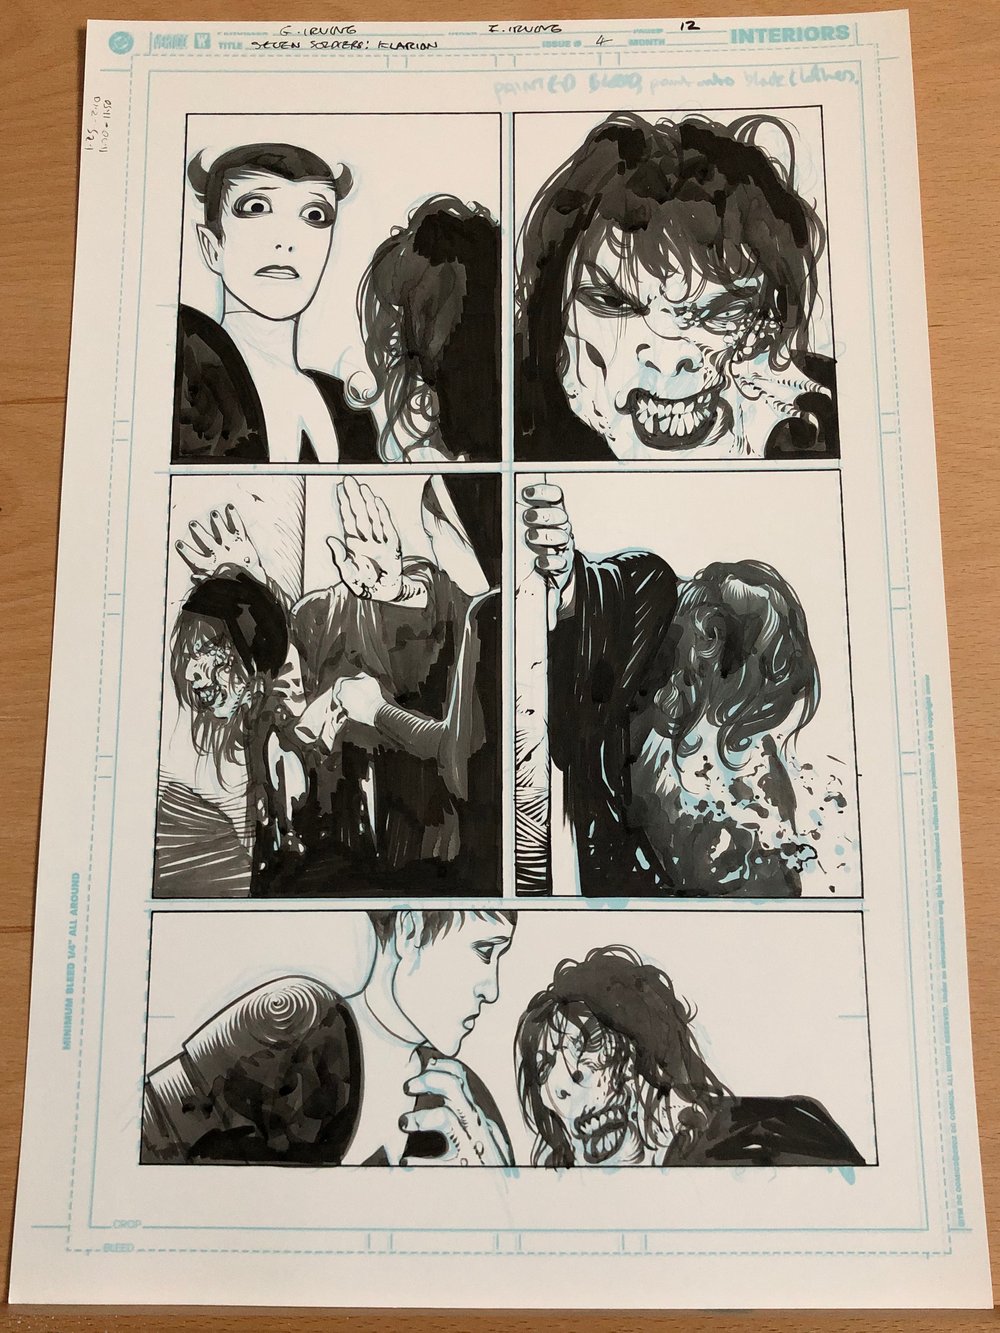 Image of Klarion the Witchboy (2005) issue 4 page 12